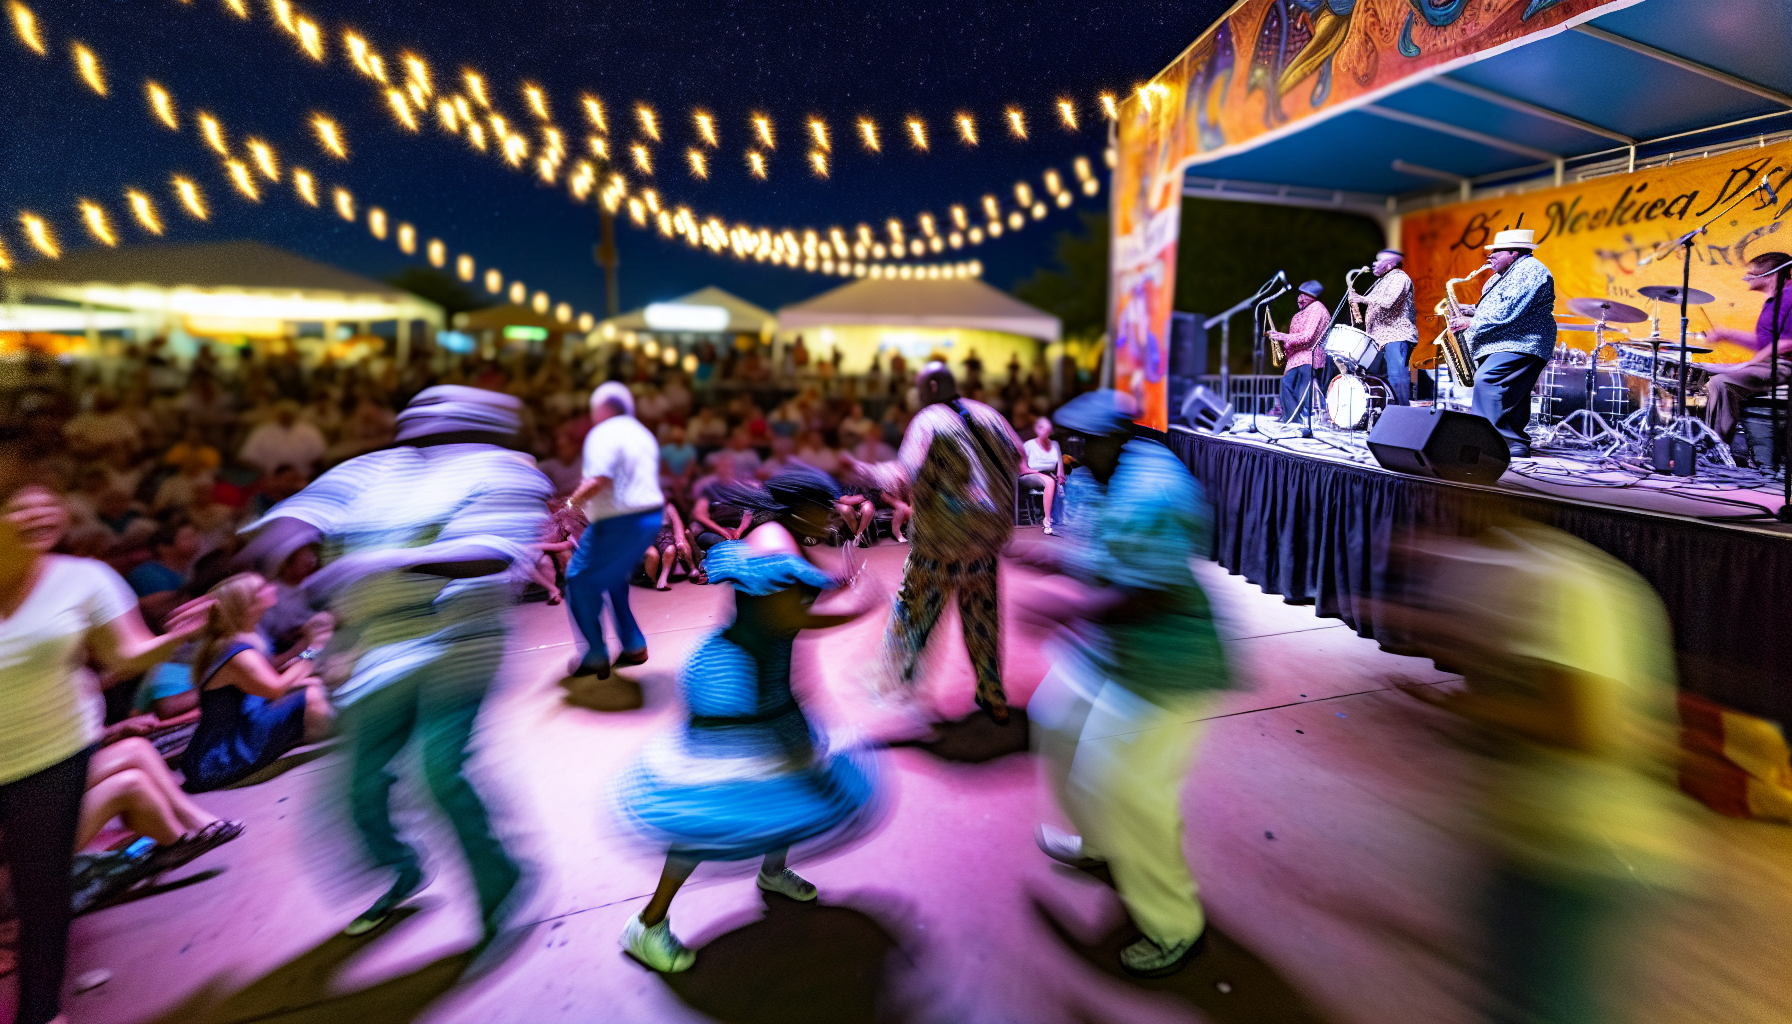 A vibrant Zydeco music festival with people dancing and enjoying the music